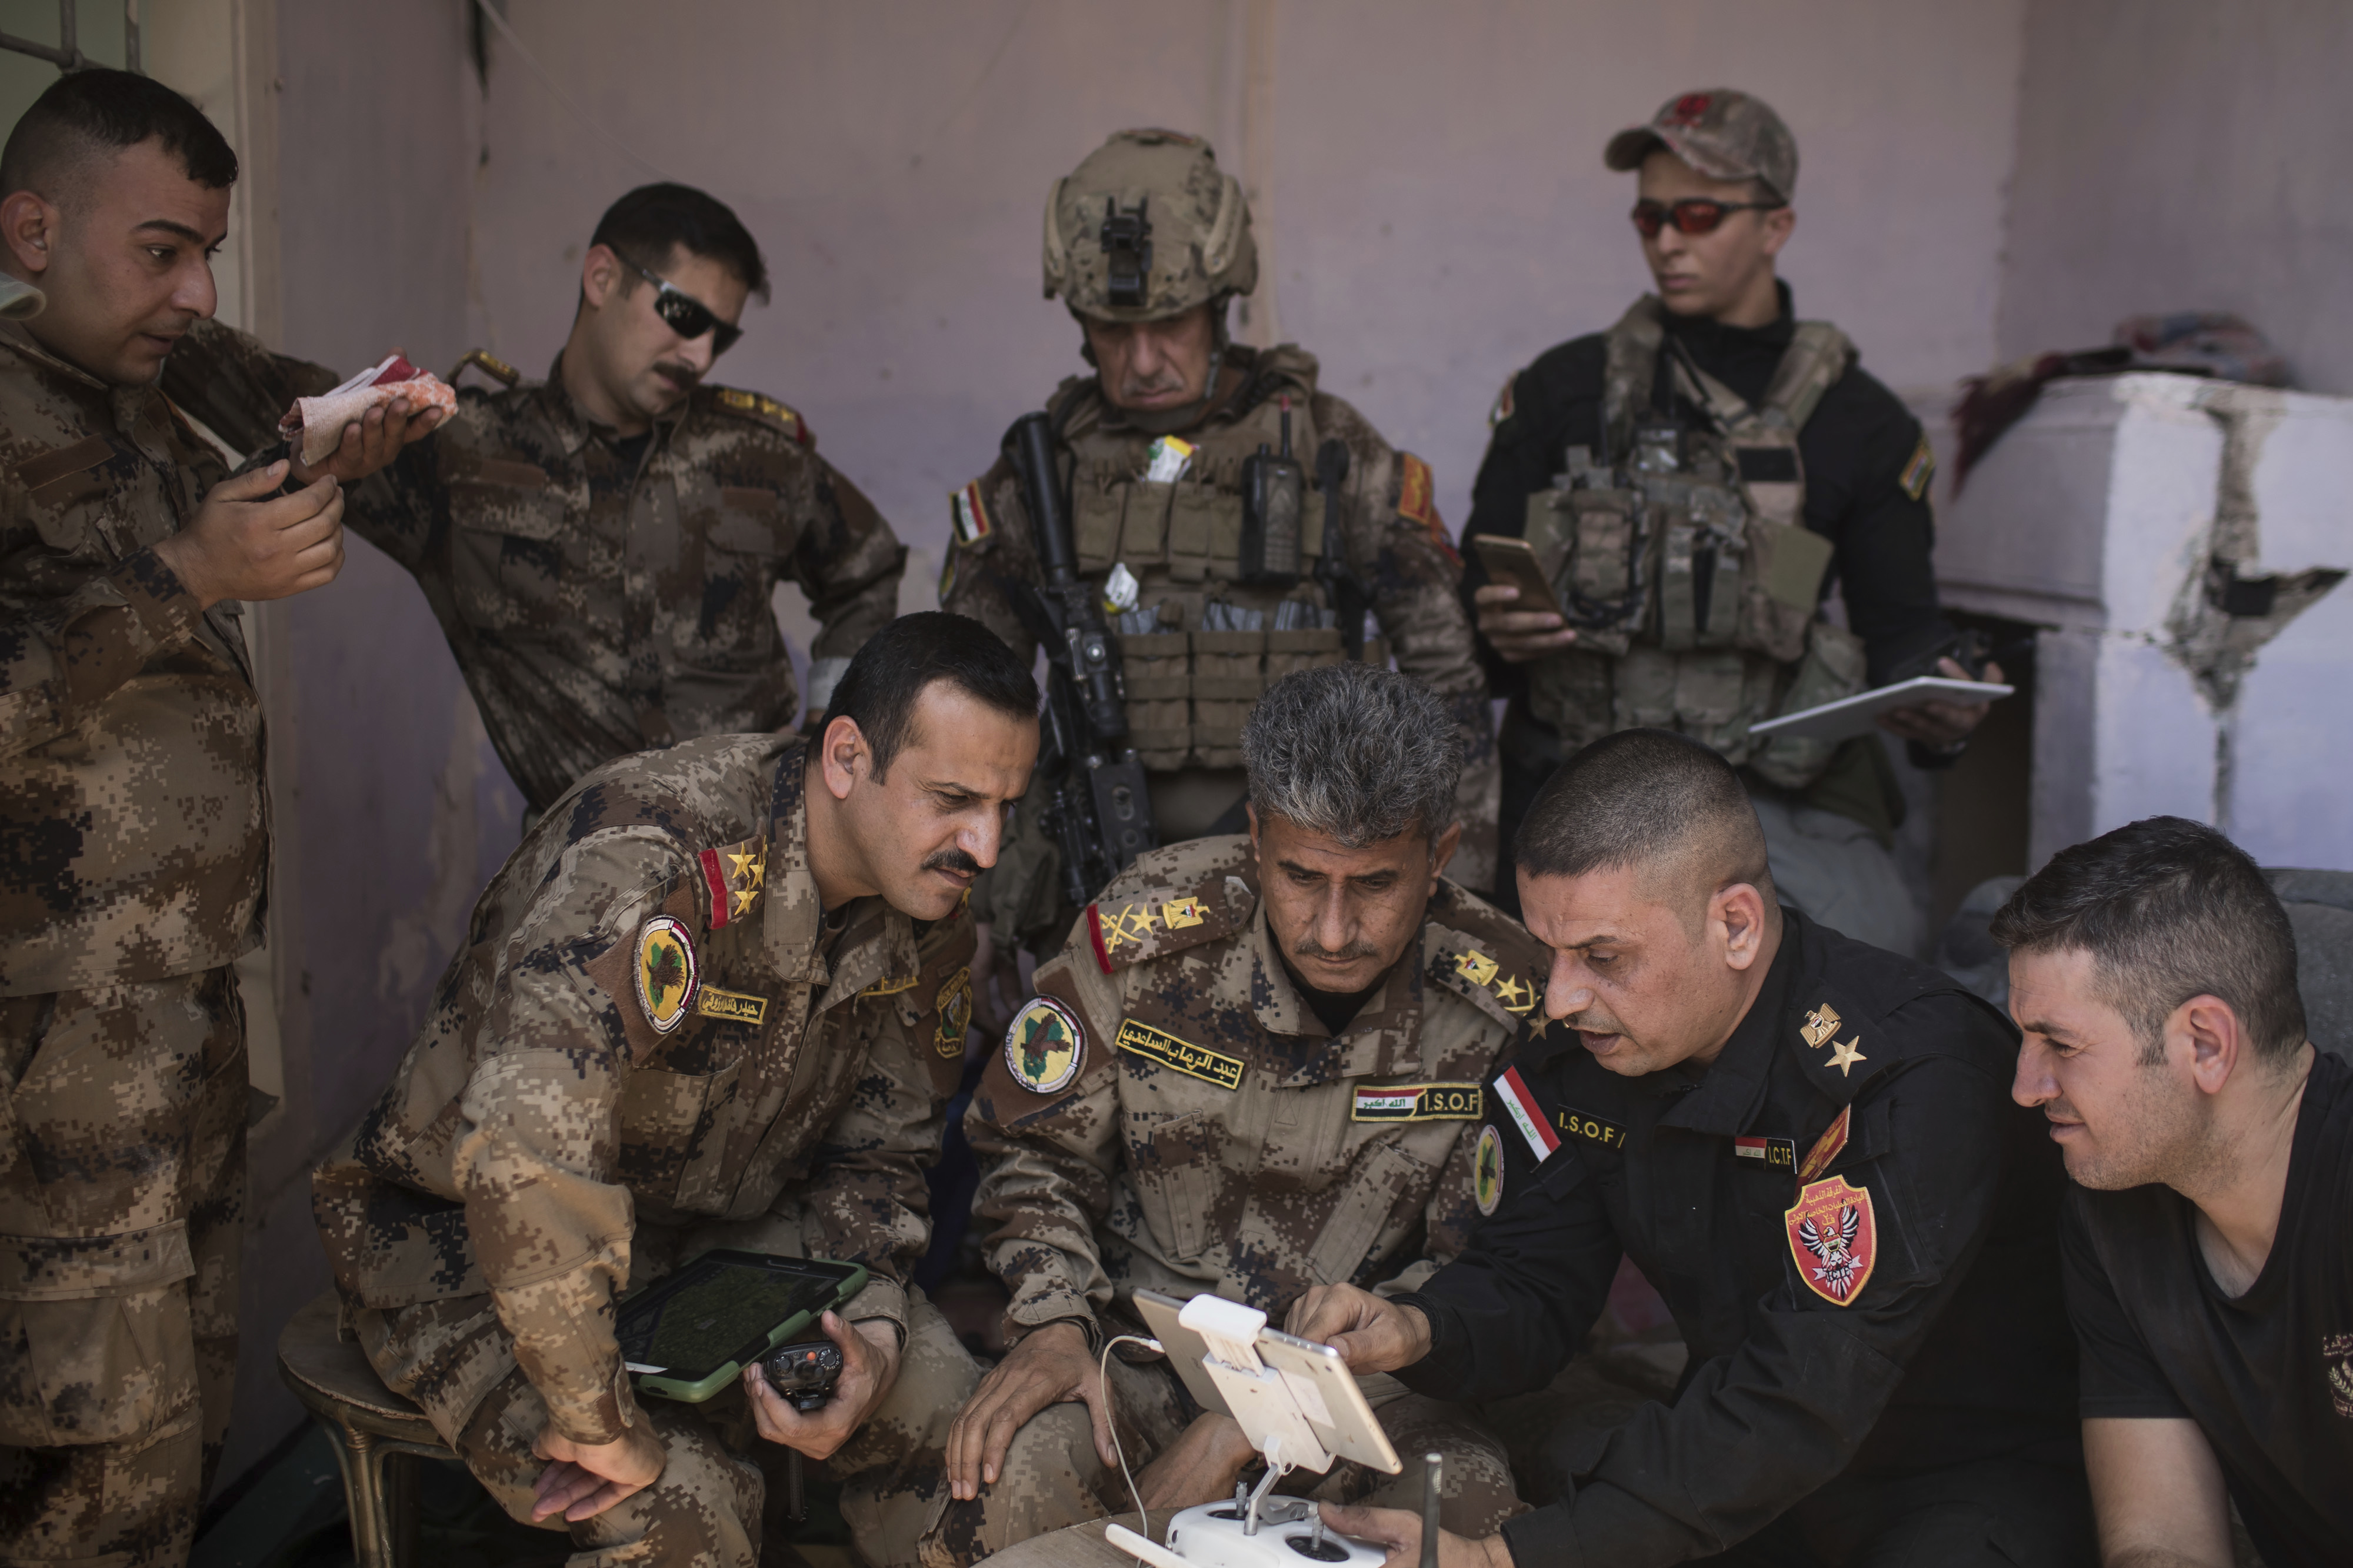 Iraqi special forces Lt. Gen. Abdul-Wahab al-Saadi, center, and his team monitor Islamic State positions in the Old City of Mosul, Iraq, Tuesday, June 27, 2017. An Iraqi officer says counterattacks by Islamic State militants on the western edge of Mosul have stalled Iraqi forces' push in the Old City _ the last IS stronghold in the city. (AP Photo/Felipe Dana)